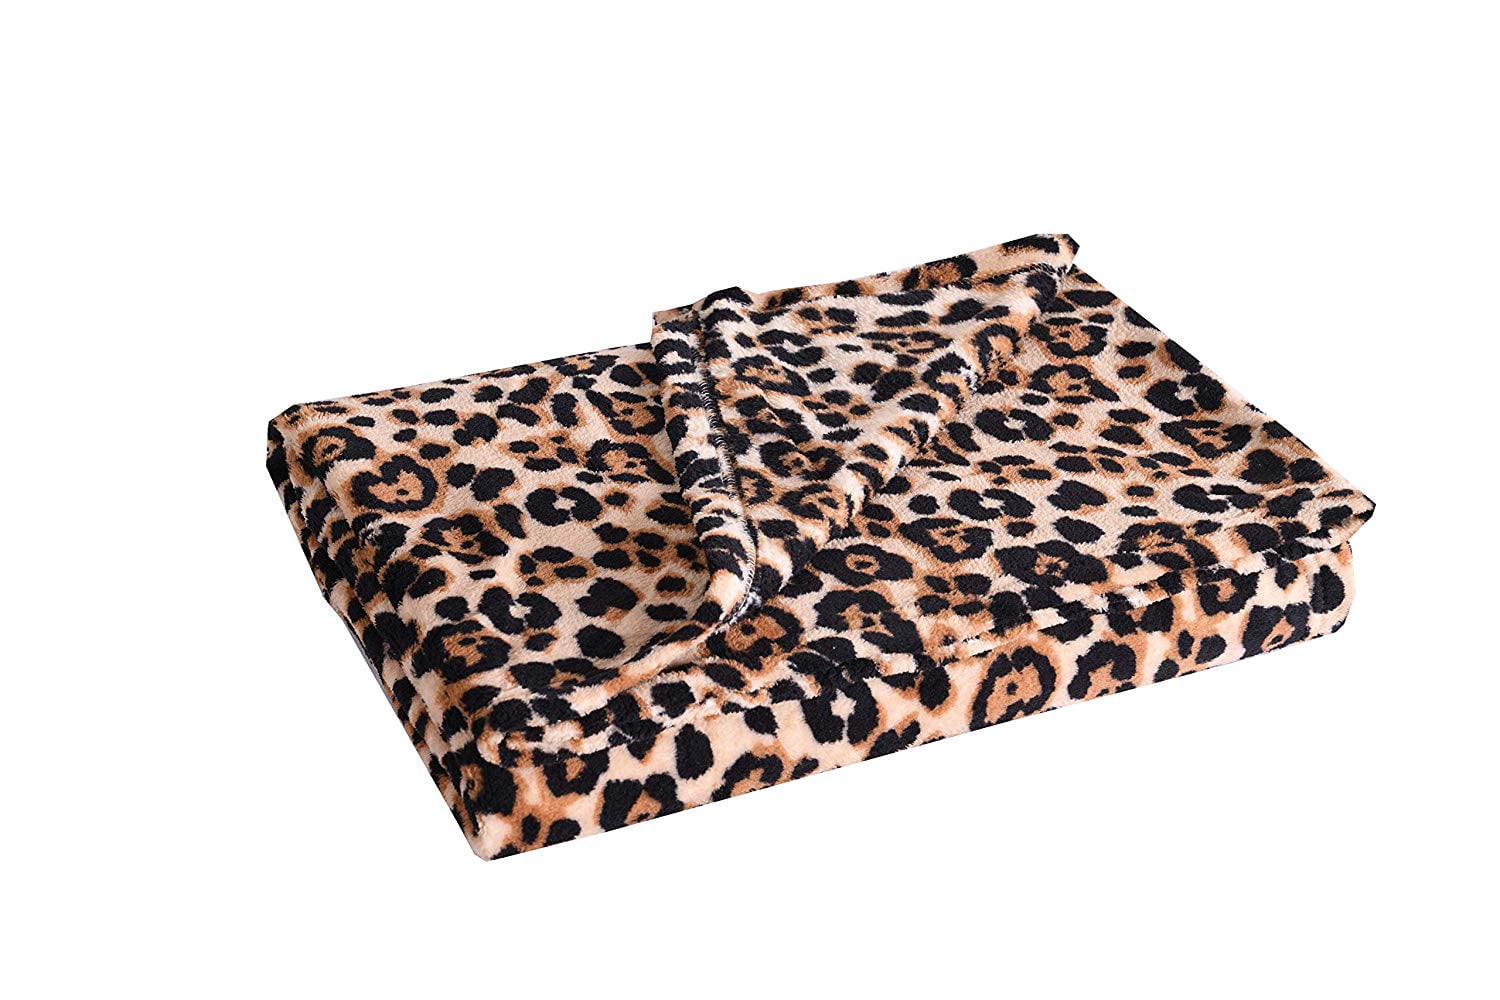 Machine Washable 40x50 inches Throw Blanket Leopard Print Soft Plush Flannel Fleece Bed Blanket for Kids Adults Warm Bed Throws for Bed Sofa Couch